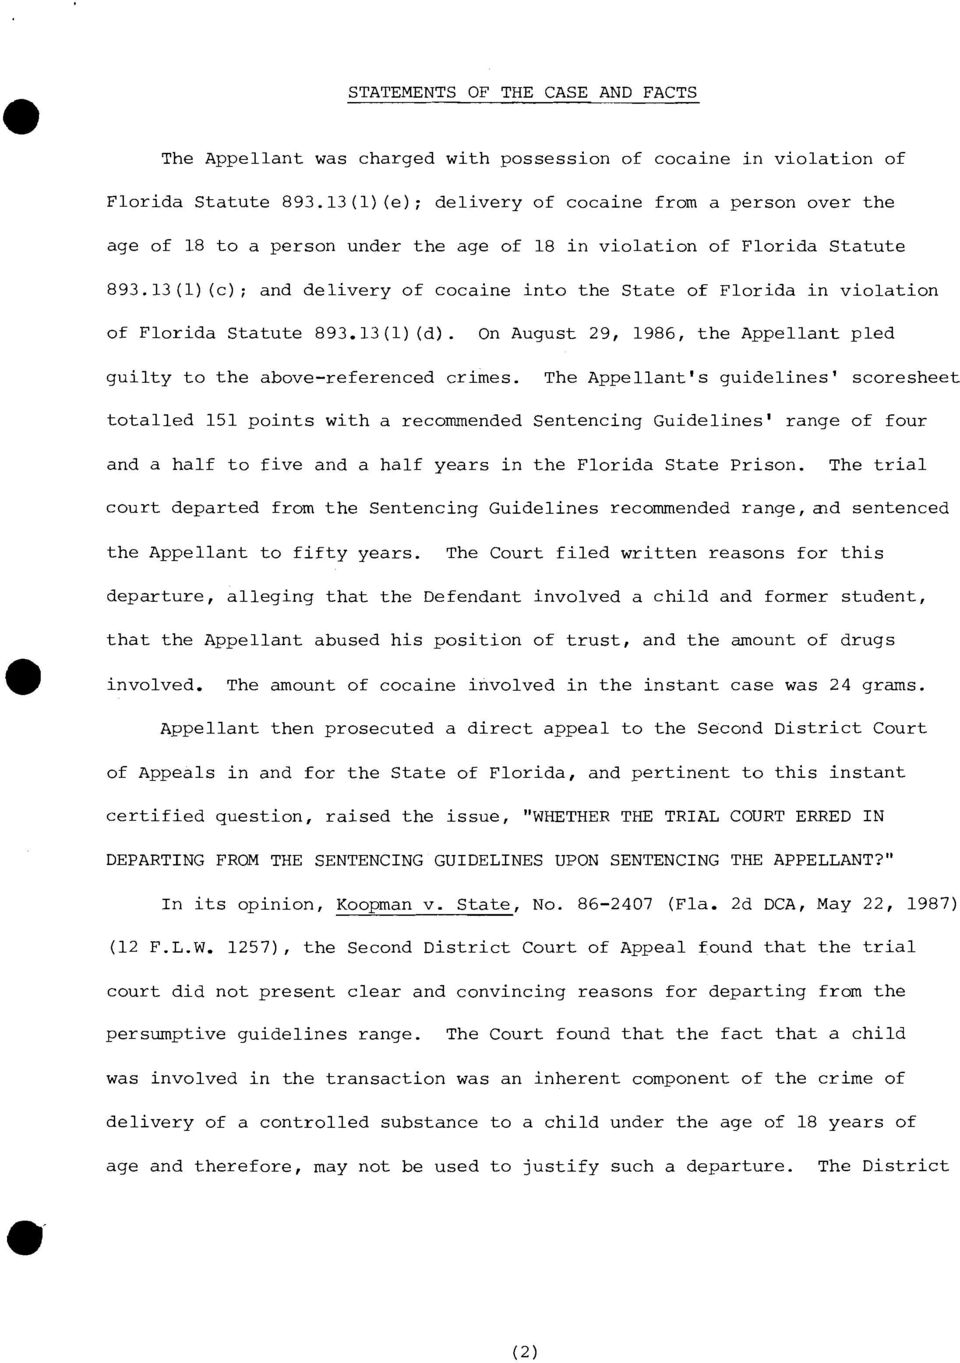 13(1)(c); and delivery of cocaine into the State of Florida in violation of Florida Statute 893.13(1) (d). On August 29, 1986, the Appellant pled guilty to the above-referenced crimes.